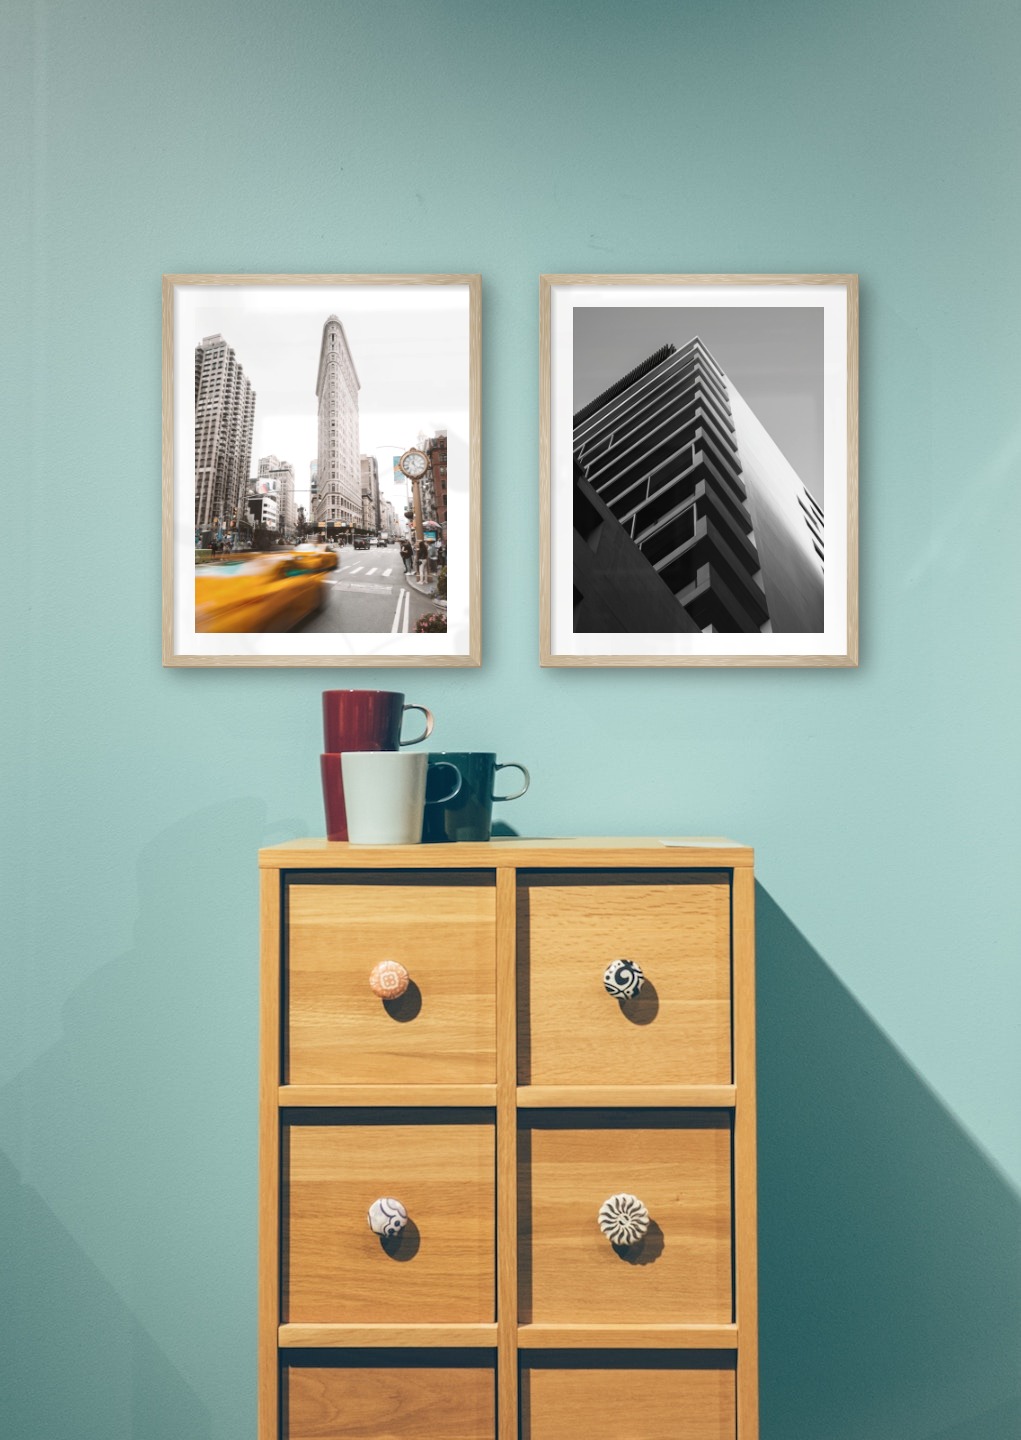 Gallery wall with picture frames in wood in sizes 40x50 with prints "Yellow taxis in town" and "Black and white building"